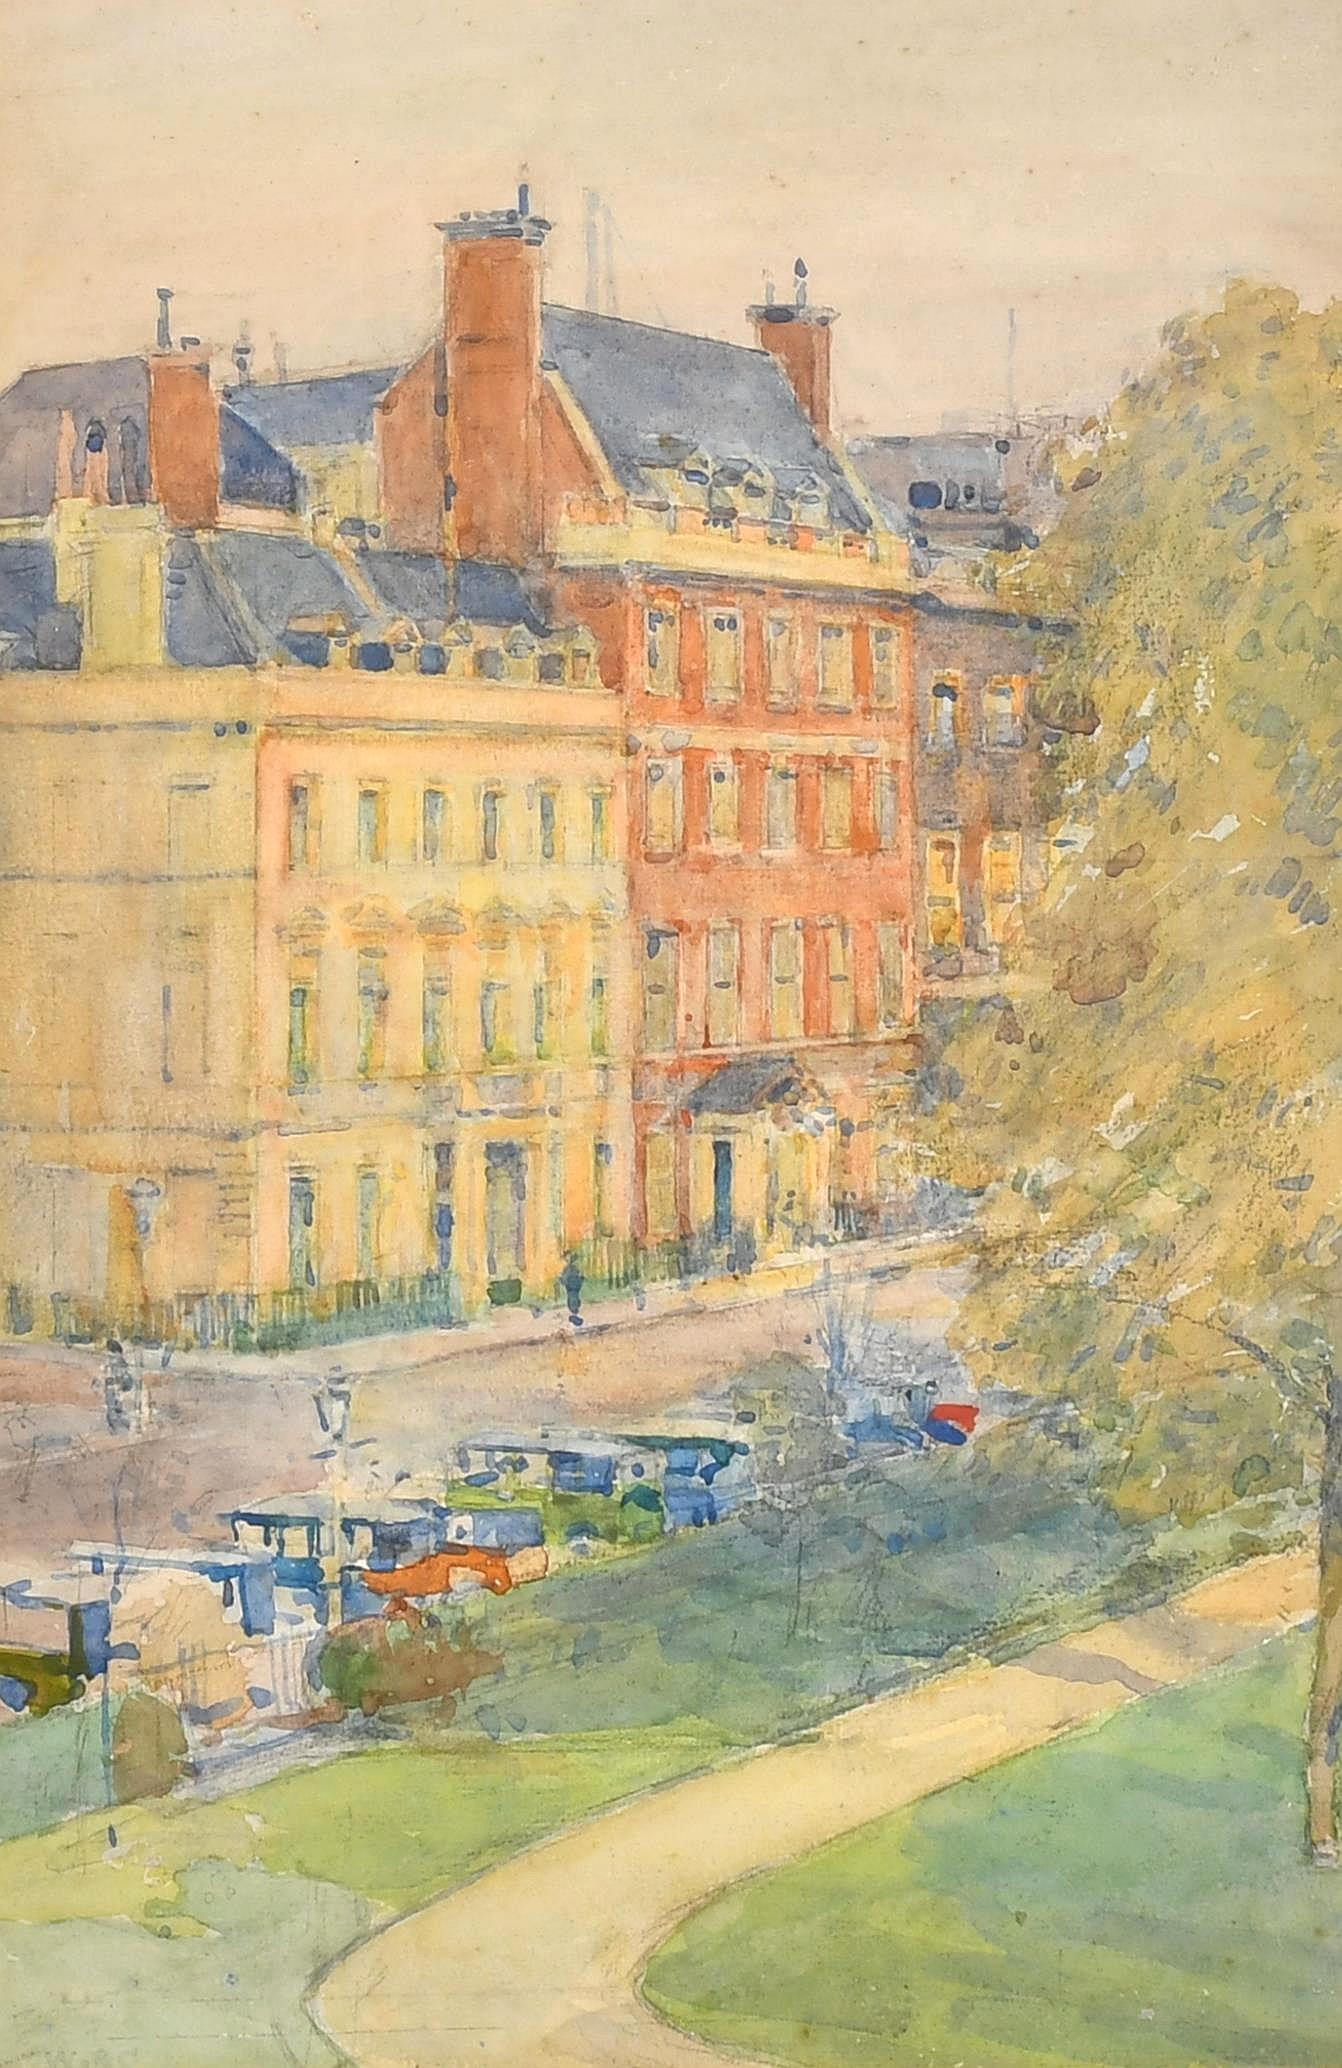 This beautiful view of St James's Square in central London was painted by William Benjamin Chamberlin in the 1920's.

The work has been painted from a window on a high floor of a building on the north side of the square looking down towards the